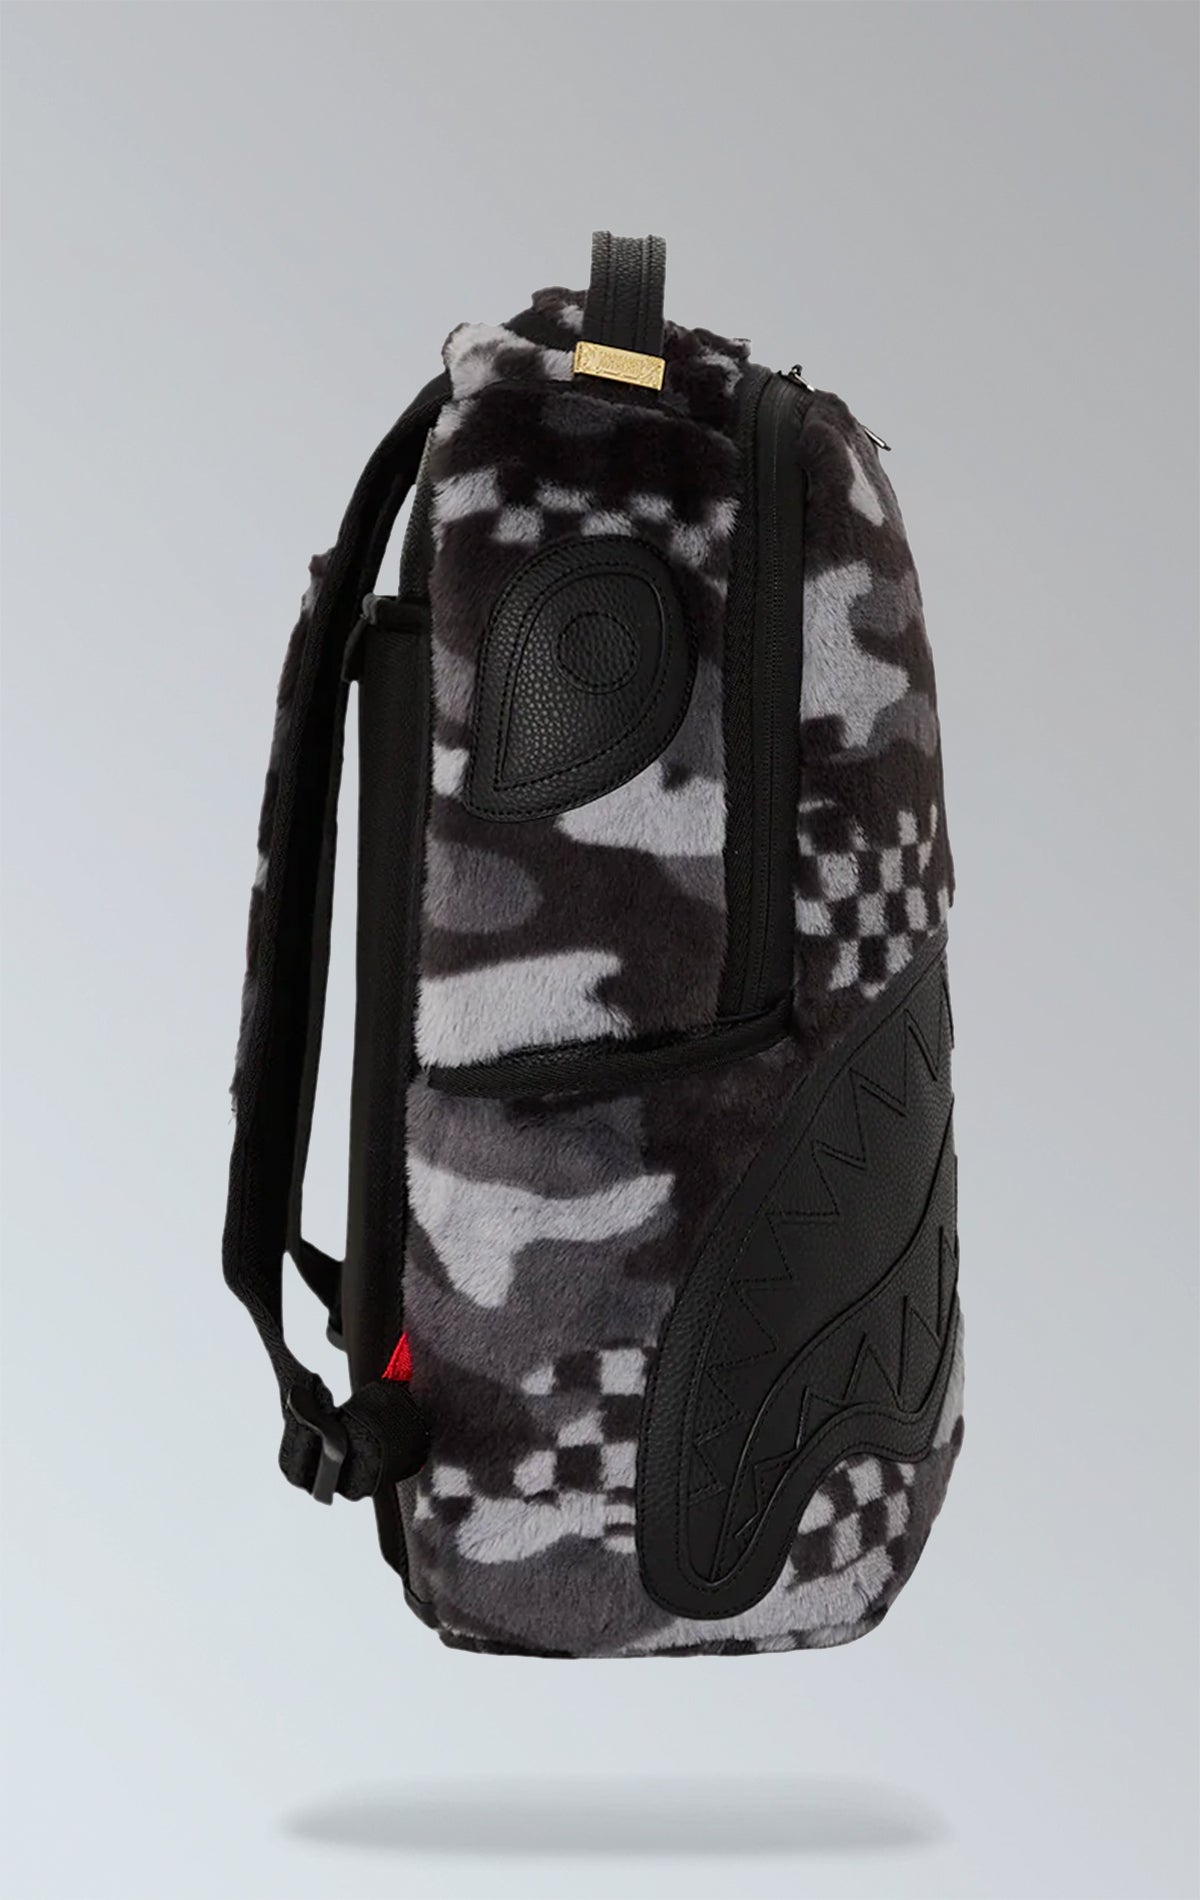 Multicolored Sprayground Flock 3AM backpack with separate laptop and sunglasses compartments, padded back, and side pockets.